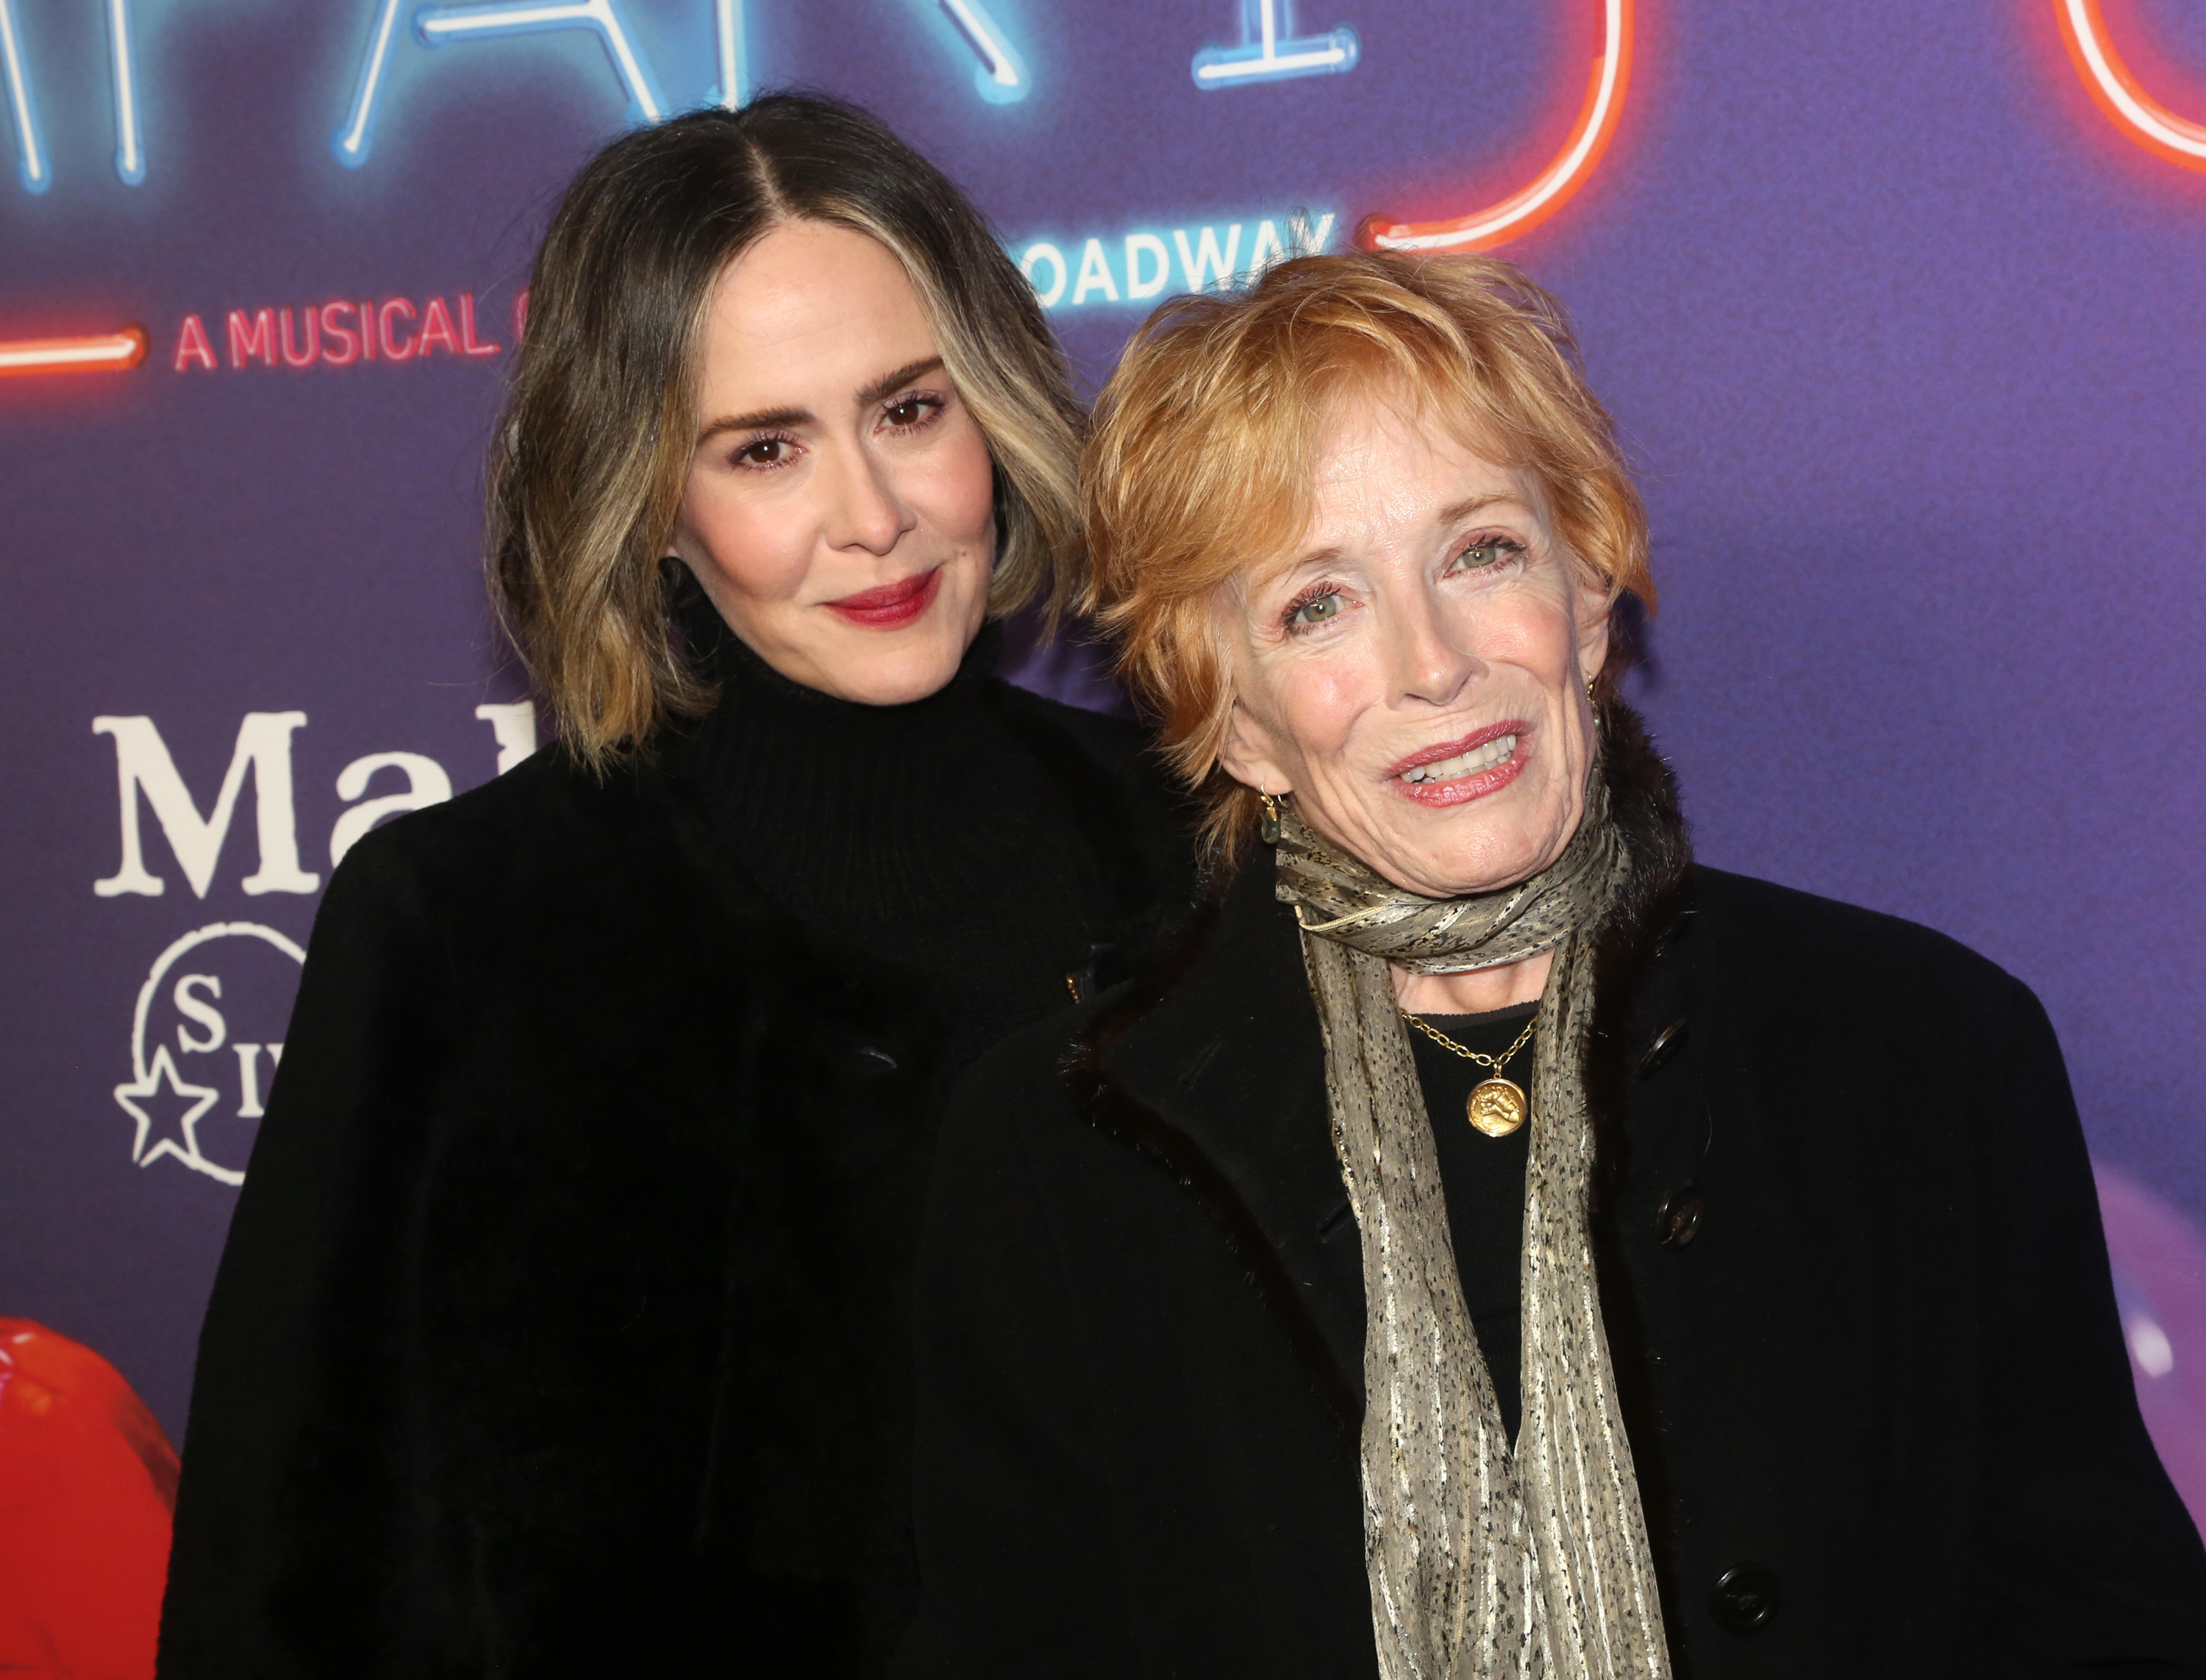 Actors Sarah Paulson and Holland Taylor pose at the opening night for Stephen Sondheim's "Company" on Broadway at The Bernard B. Jacobs Theatre on December 9, 2021 in New York City. | Source: Getty Images